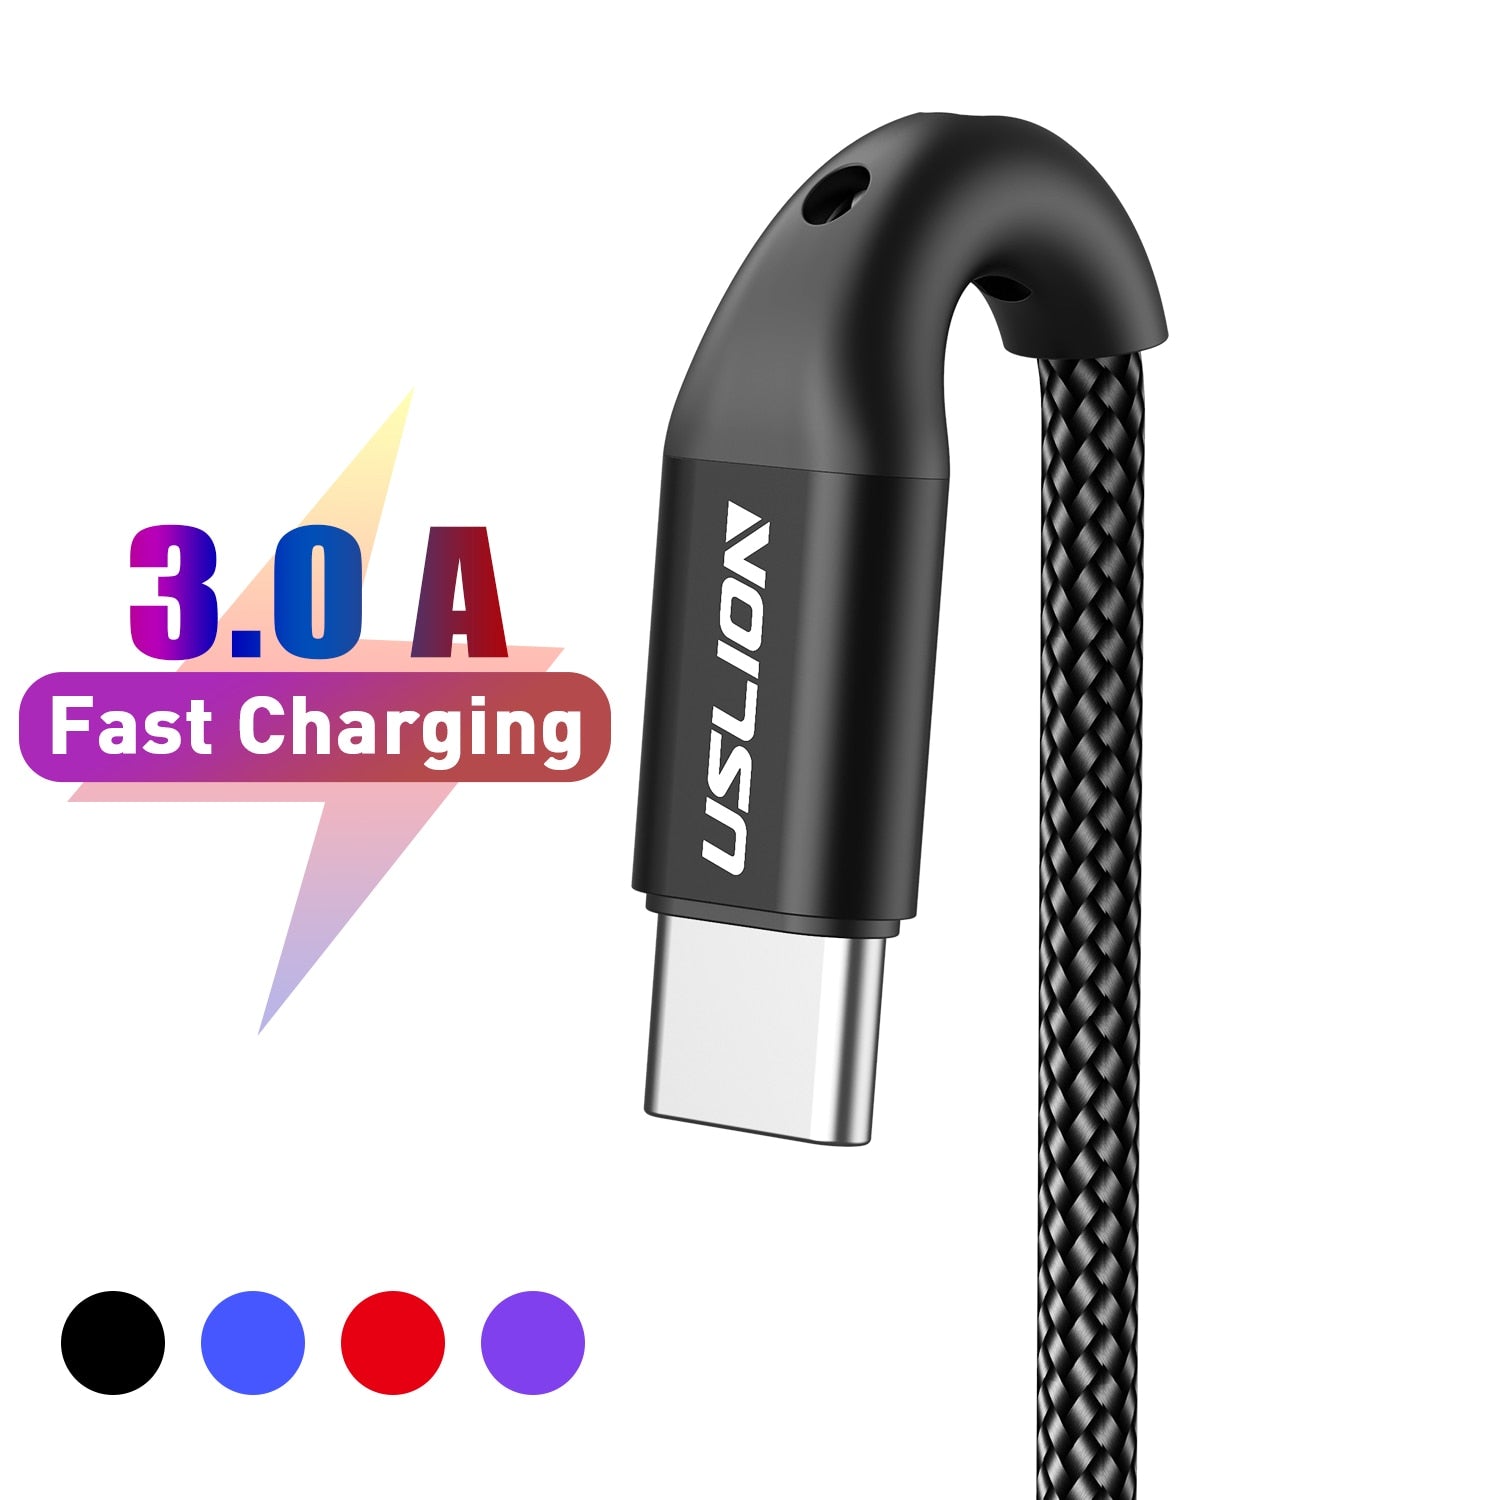 USLION 3A USB Type C Cable Fast Charging Wire for Samsung Galaxy S8 S9 Plus Xiaomi mi9 Huawei Mobile Phone USB C Charger Cable - Boom Boom London